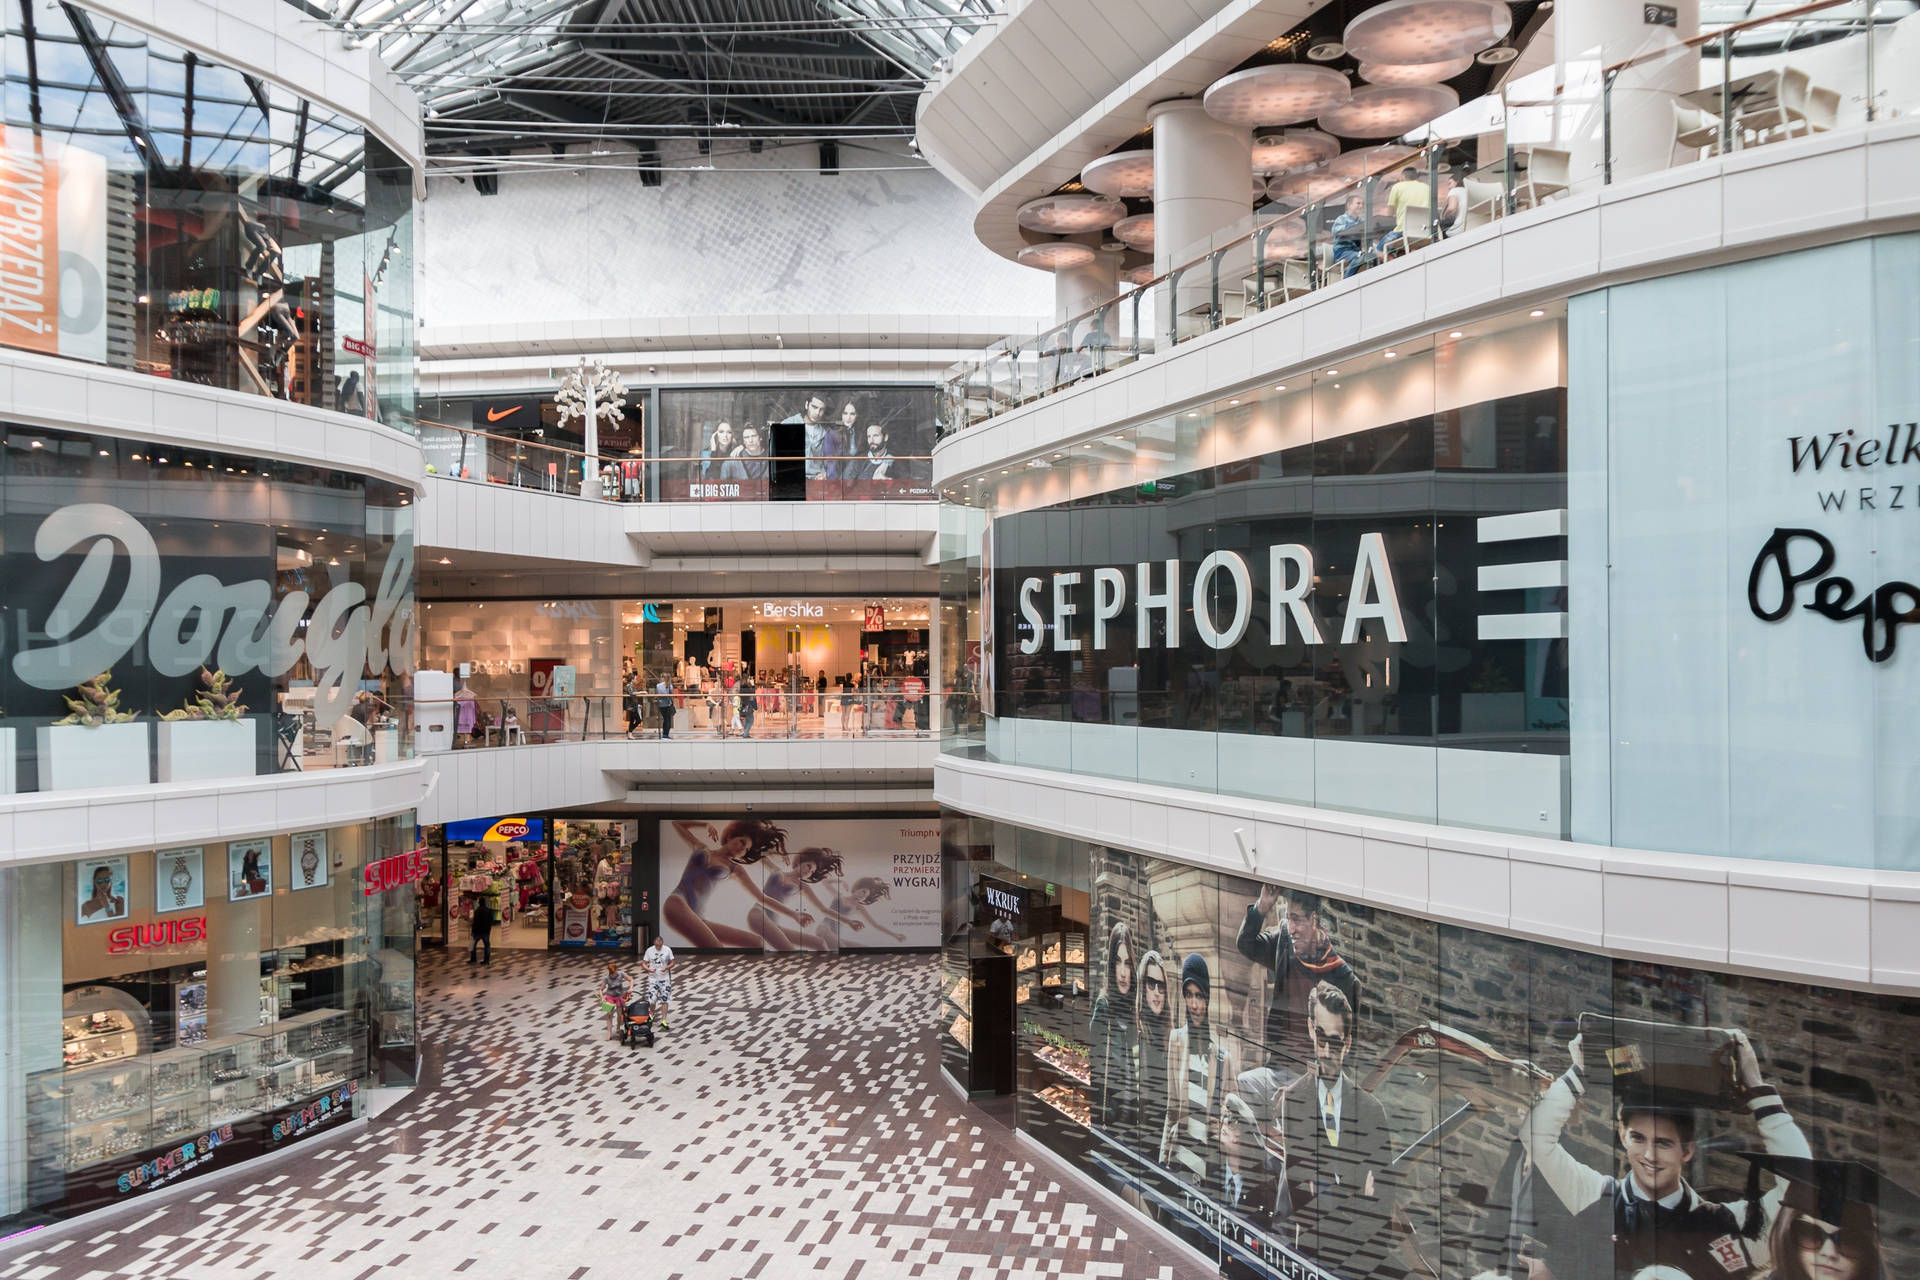 Sephora Outlet Shopping Mall Background